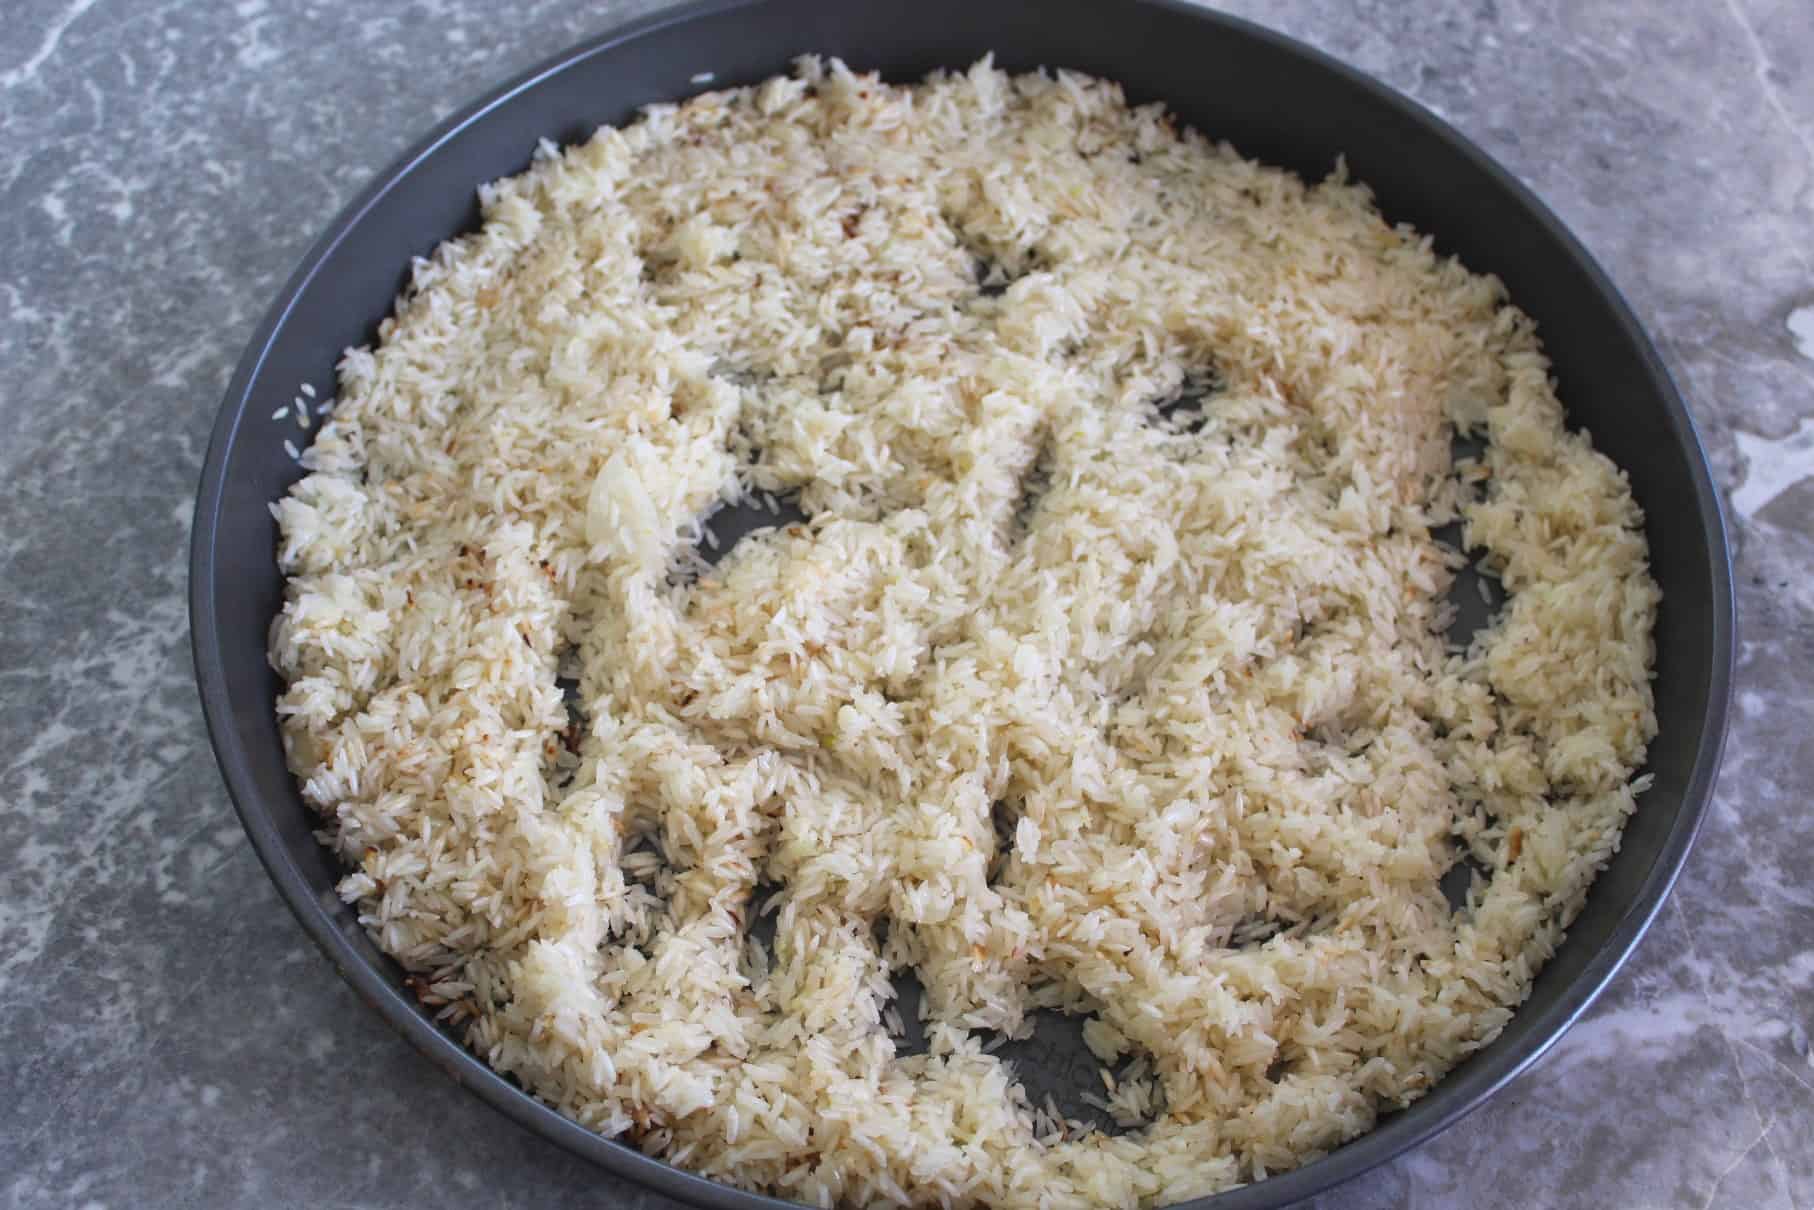 Picture shows a round baking tray with sauteed rice spread in it.